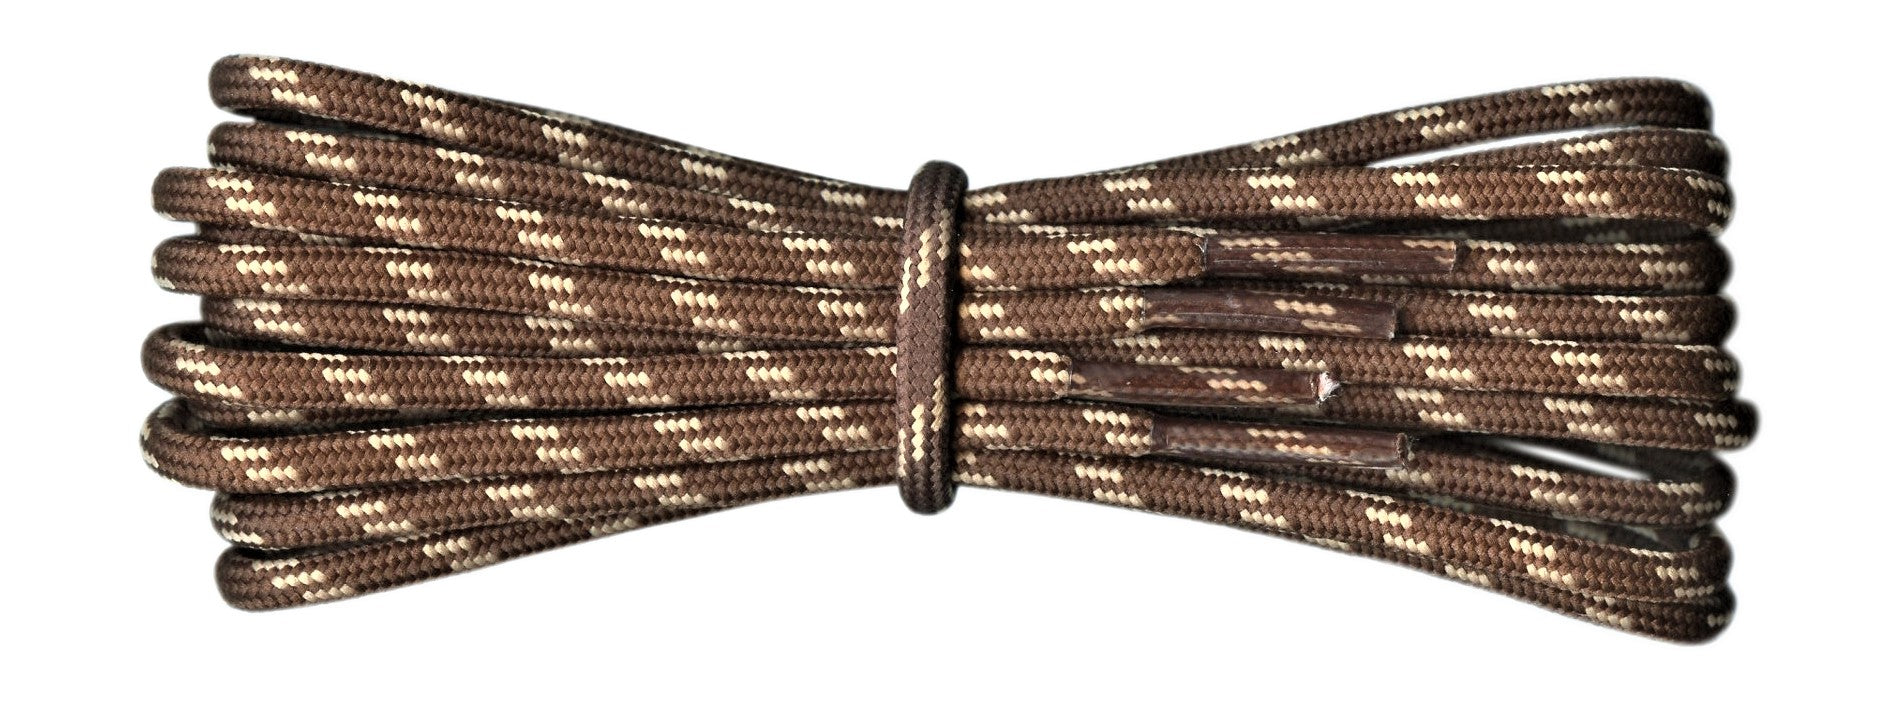 Strong Round Boot Laces Brown with Cream flecks for hiking or walking  3.5 mm - fabmania shoe laces